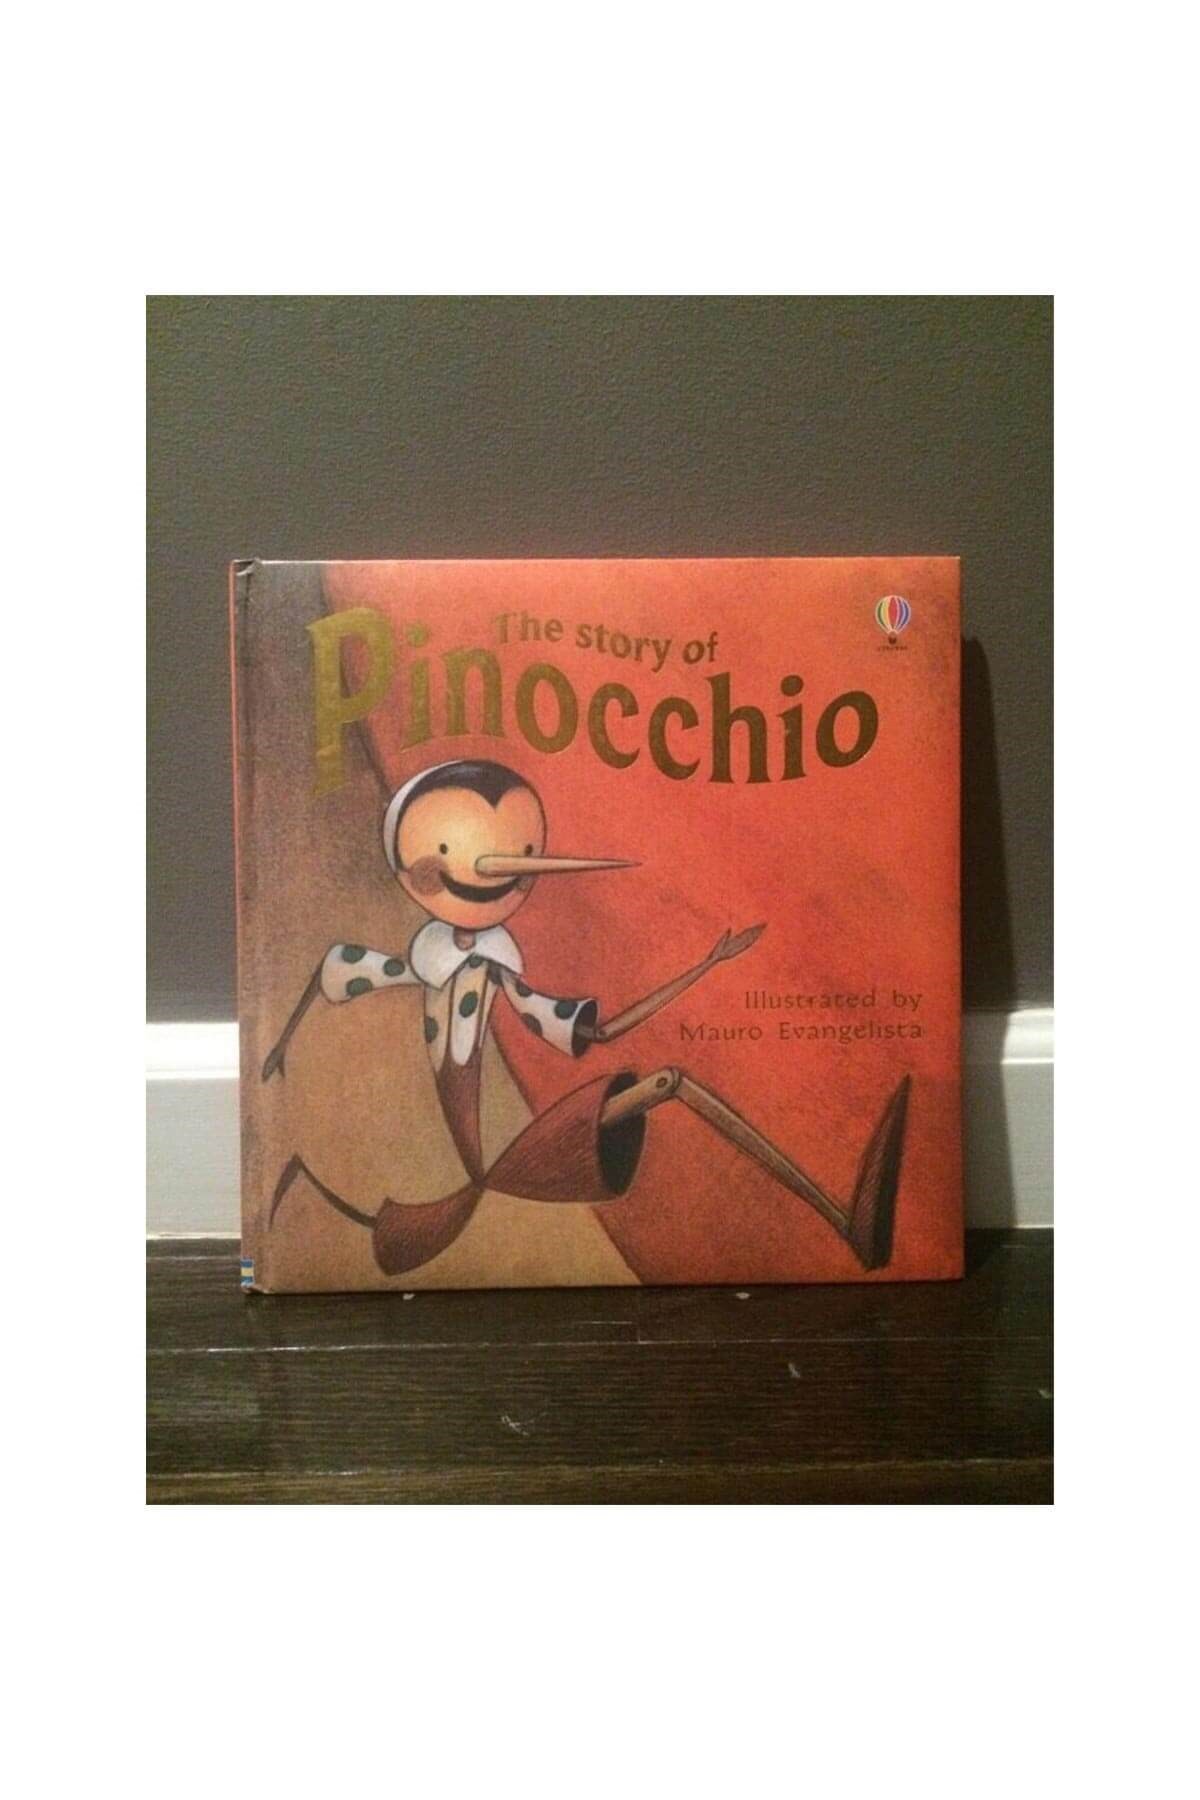 The Usborne Pic The Story of Pinocchio